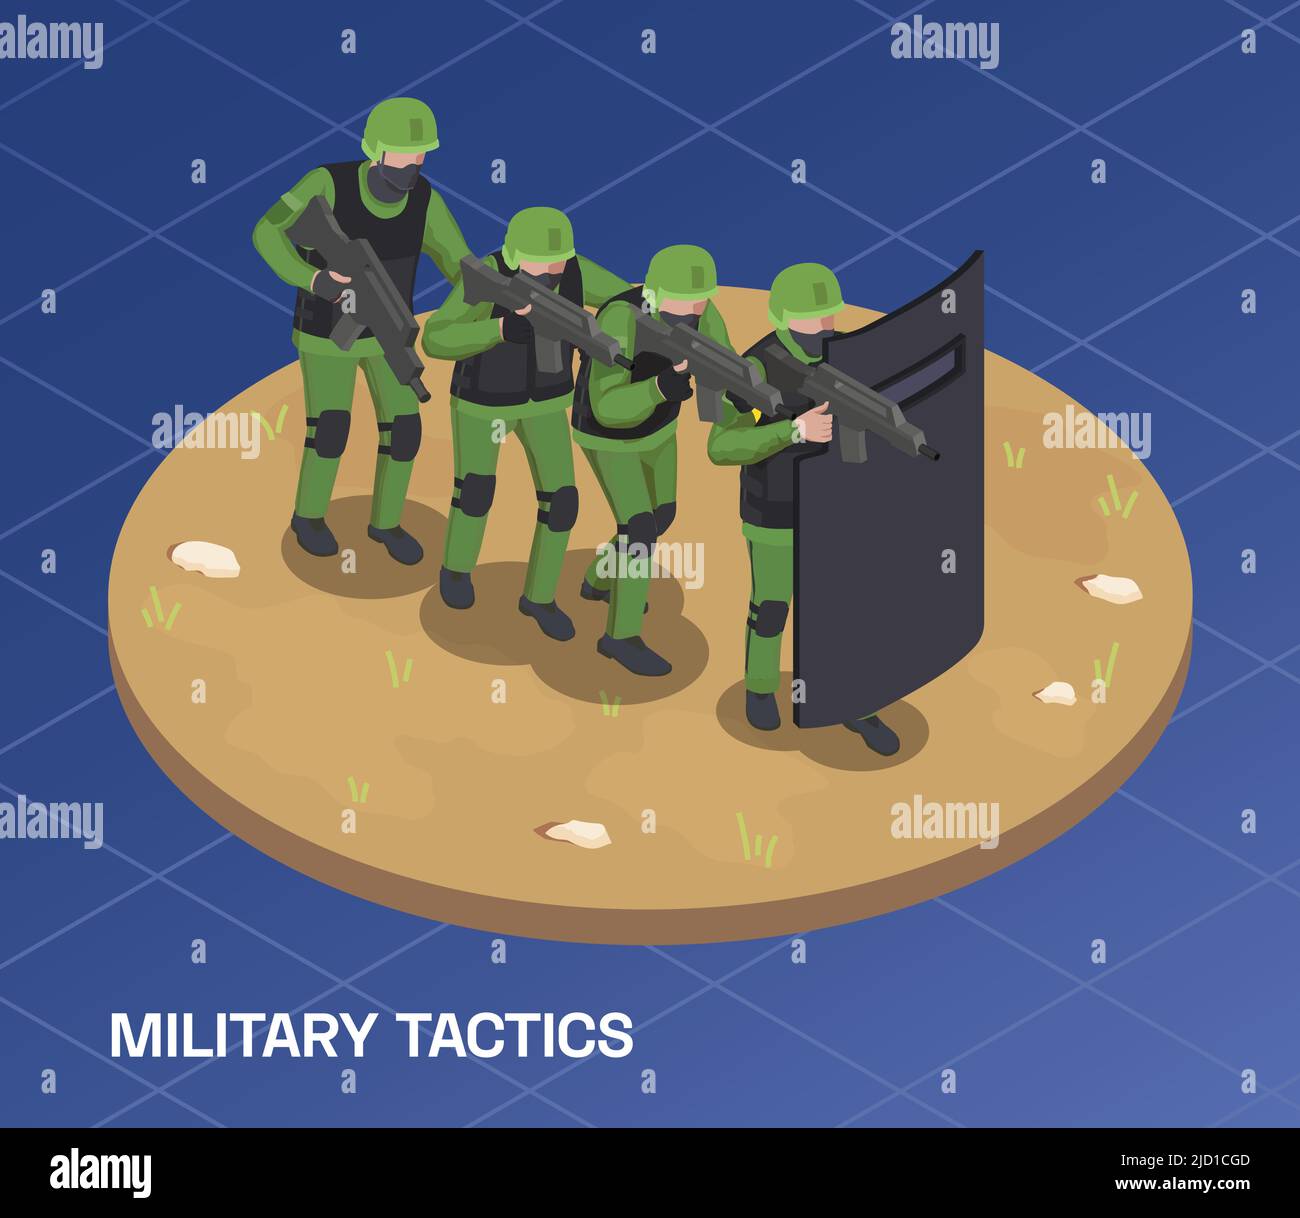 Army weapons soldier isometric composition with text and group of special forces moving forward in line vector illustration Stock Vector